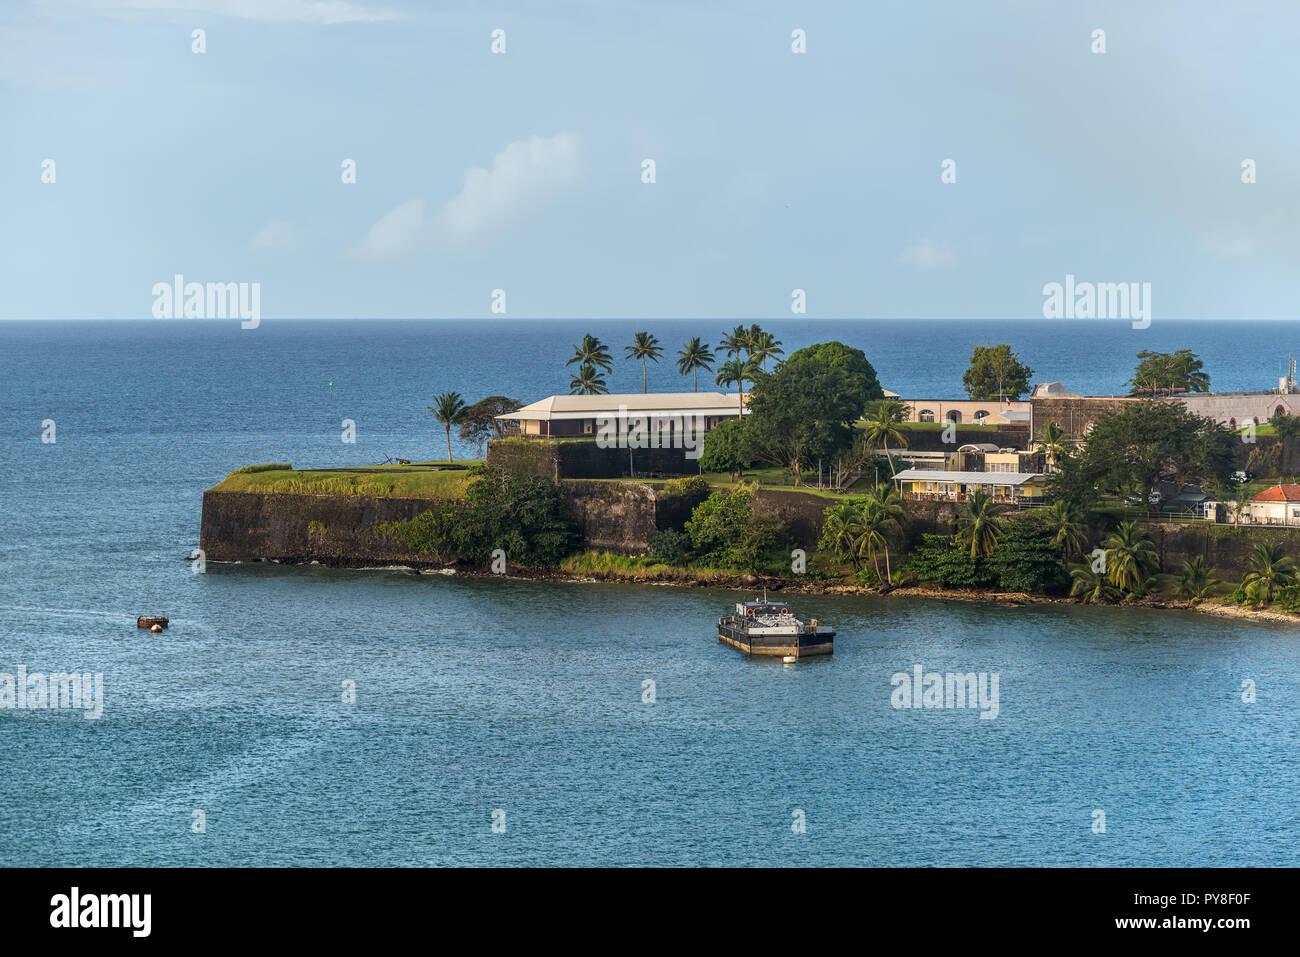 Fort-de-France, Martinique - December 19, 2016: Fort Saint Louis in Fort-de-France Bay, Martinique, West Indies, French Caribbean. View from the cruis Stock Photo